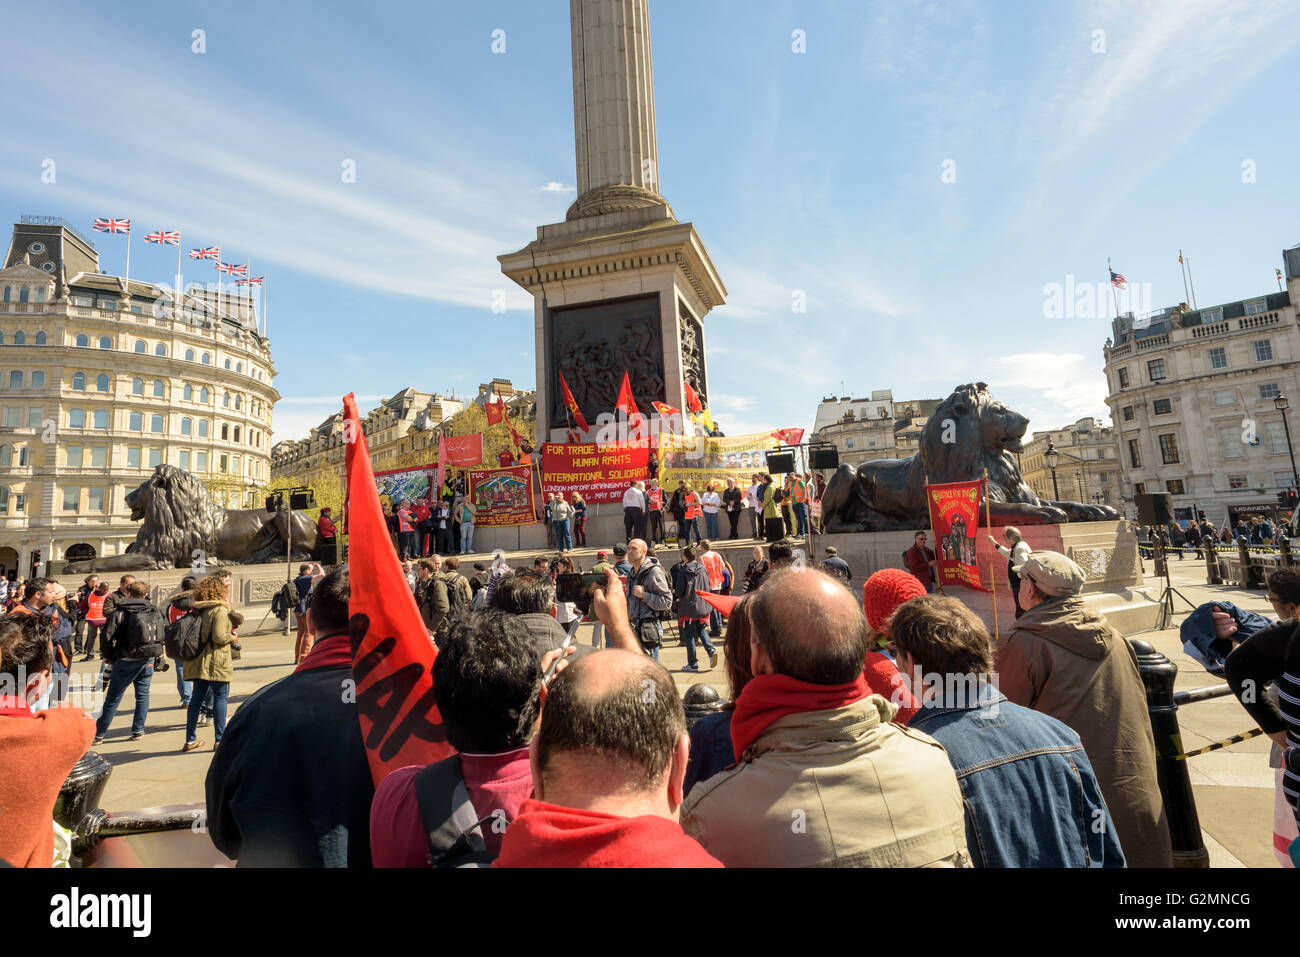 Workers and trade unions activists at the London May Day rally in Trafalgar Square London May 1st Stock Photo